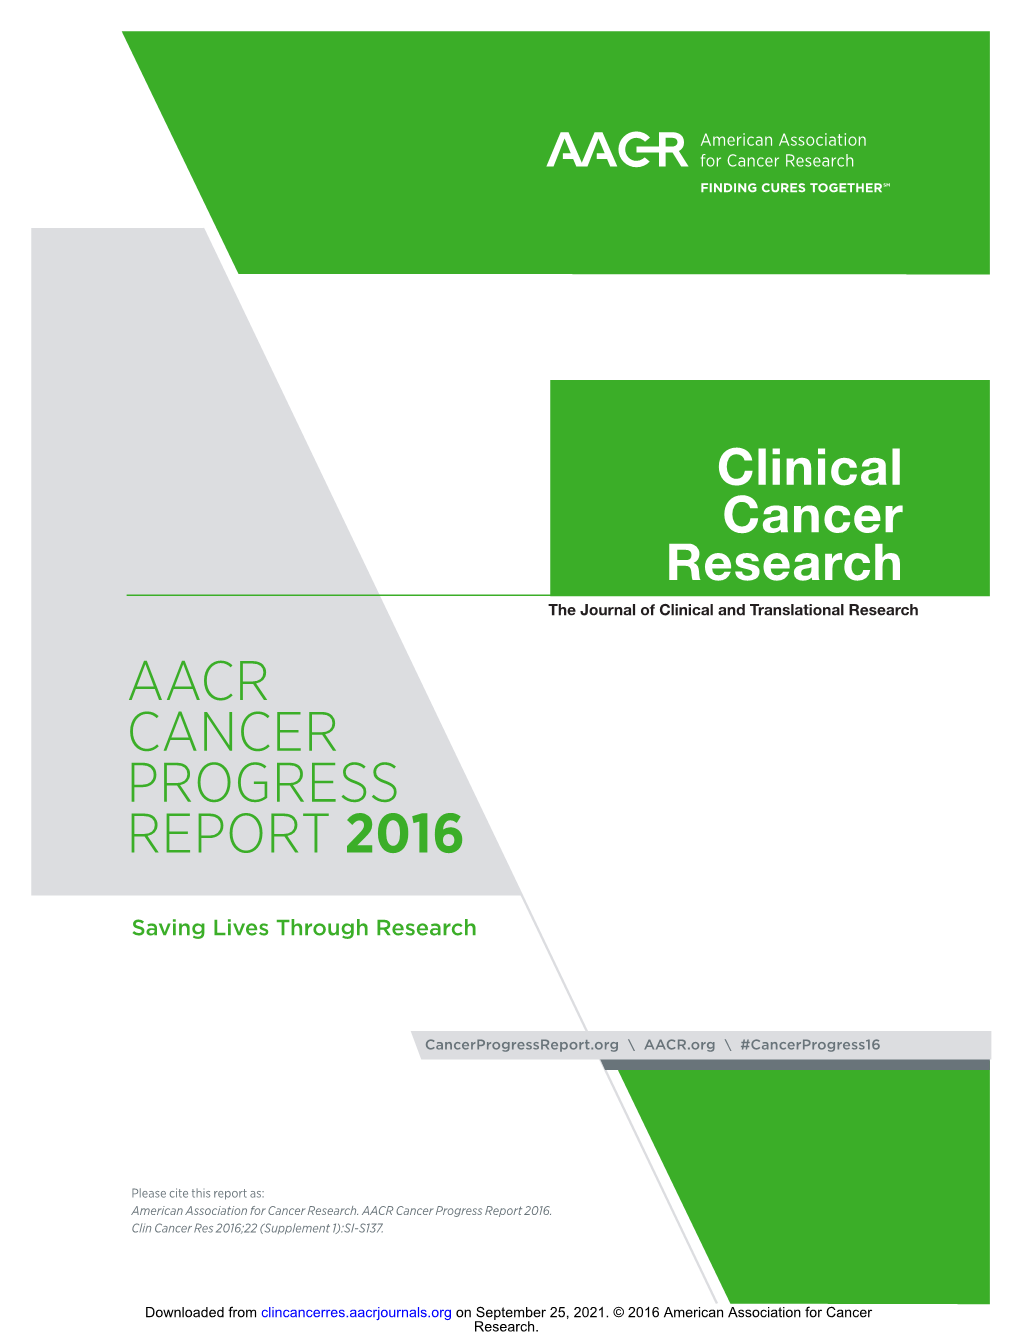 AACR Cancer Progress Report 2016